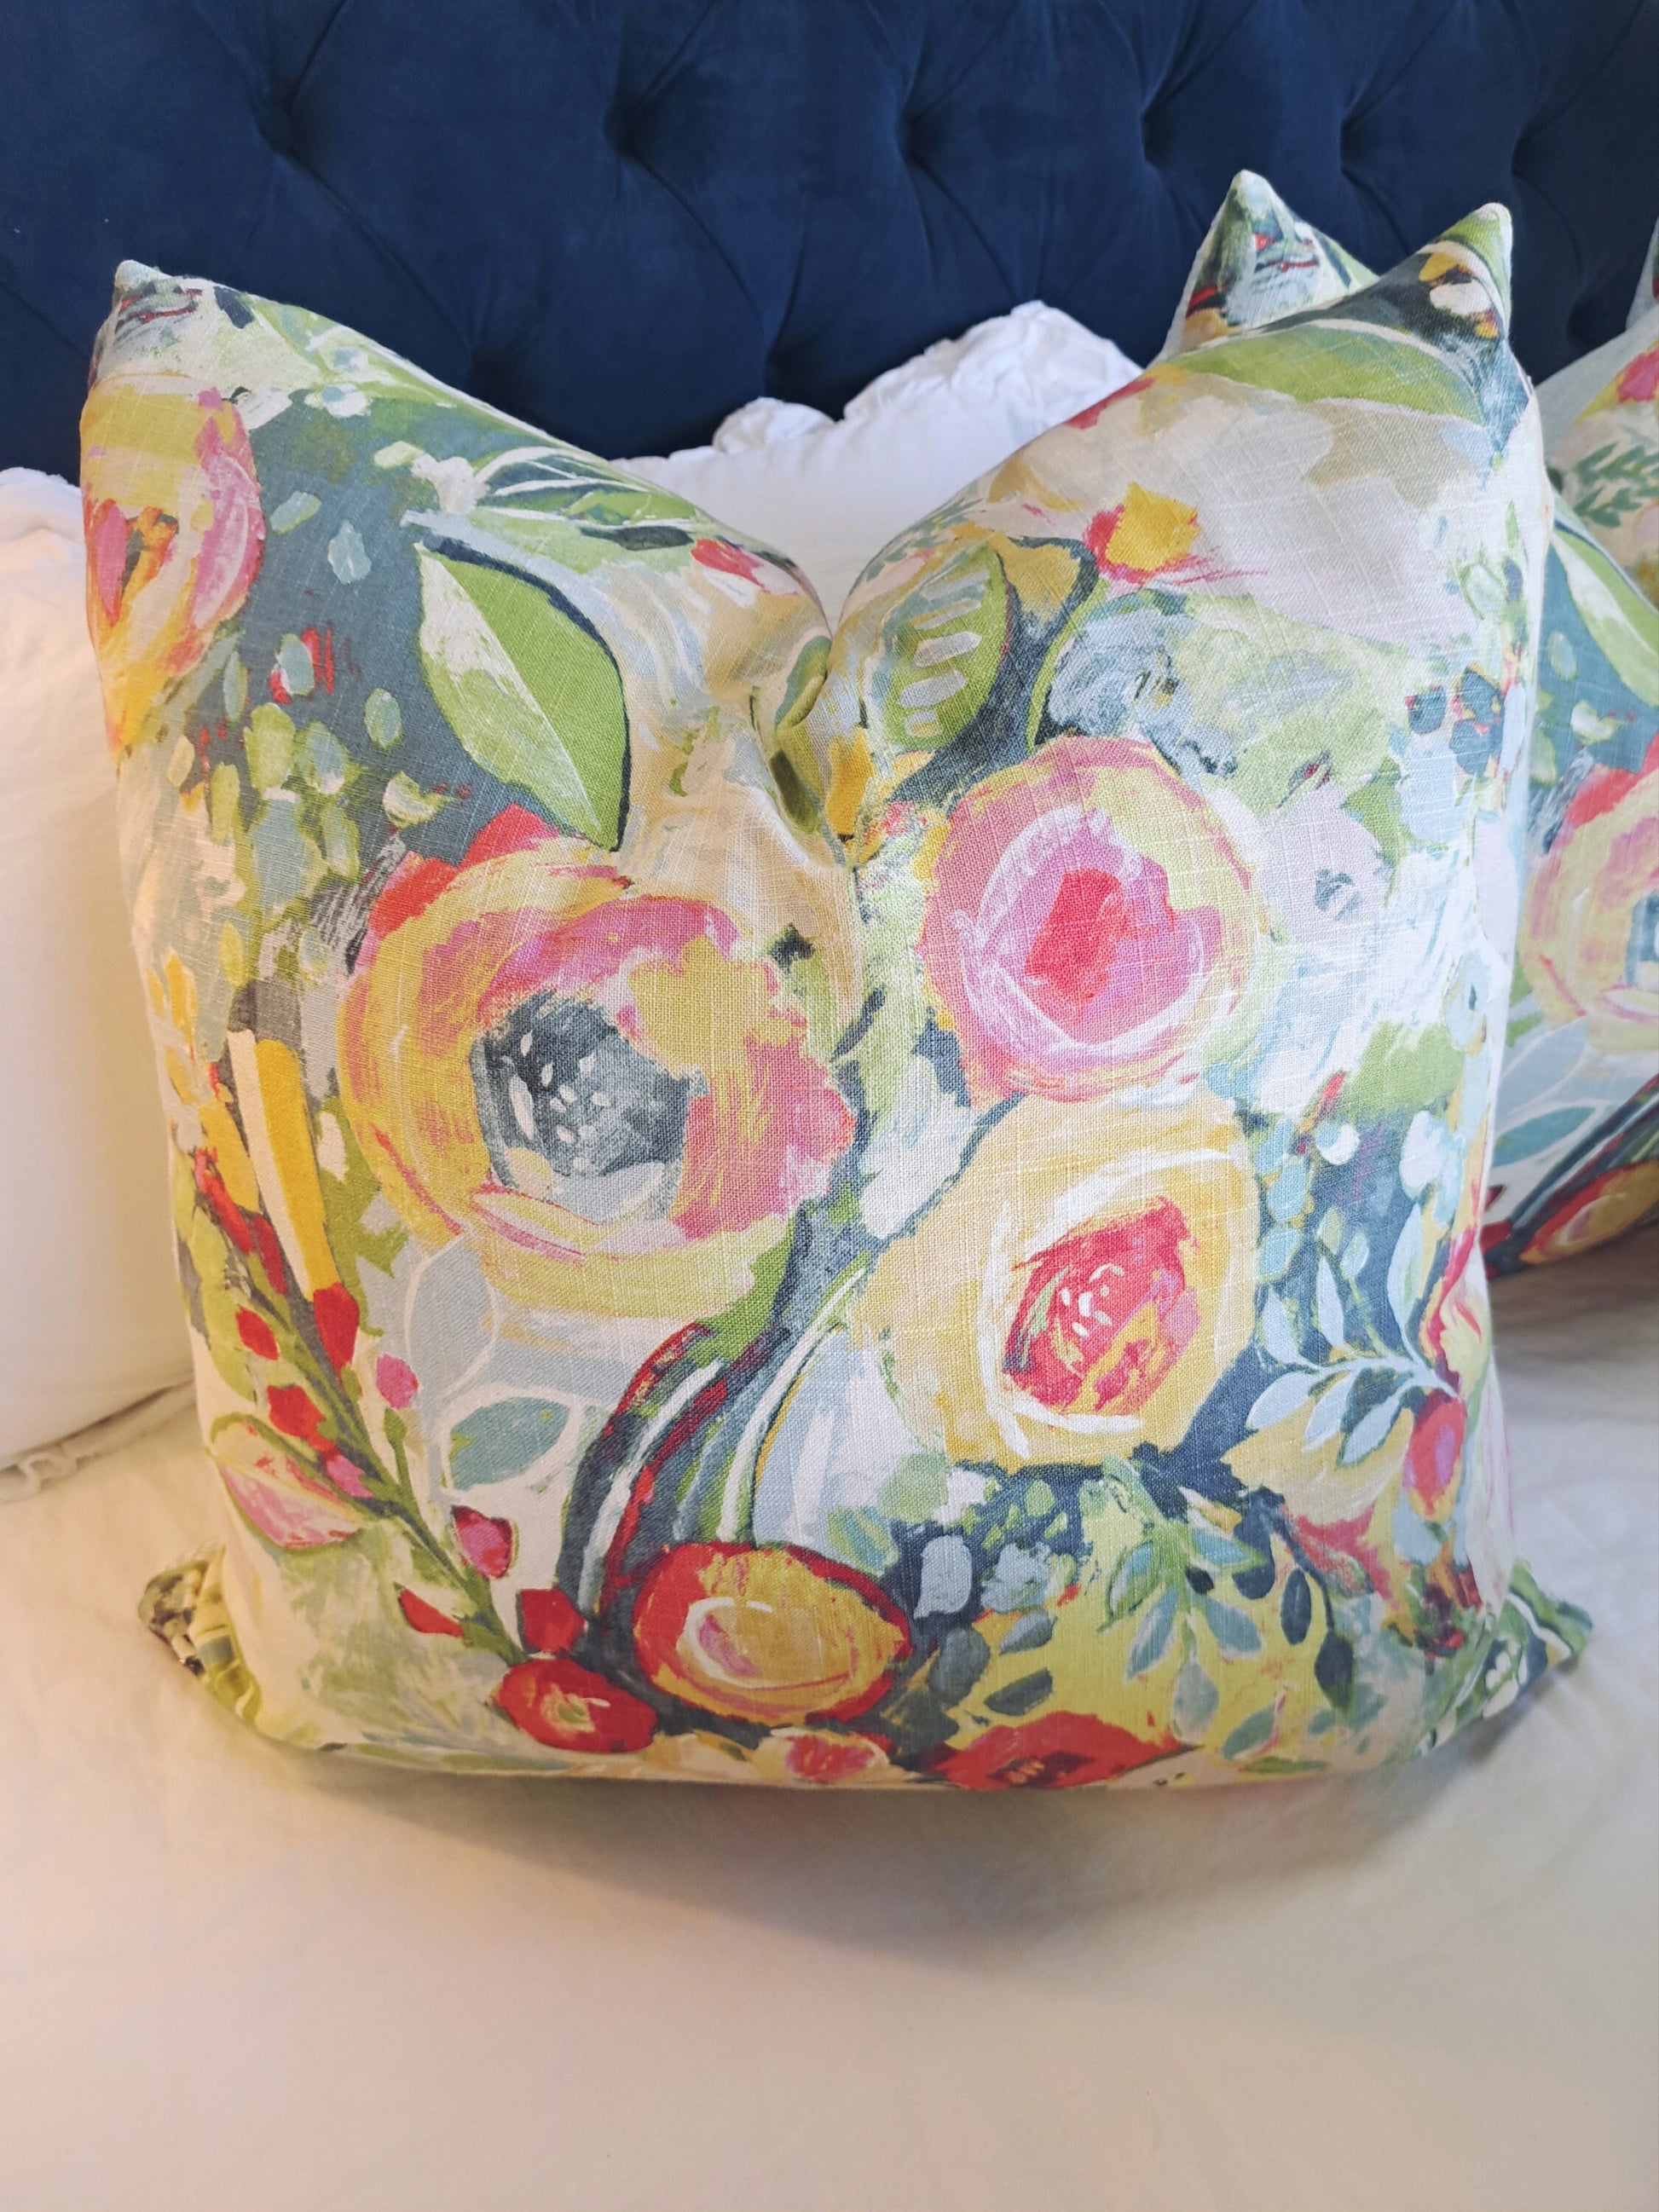 Covent Garden Floral Pillow Cover